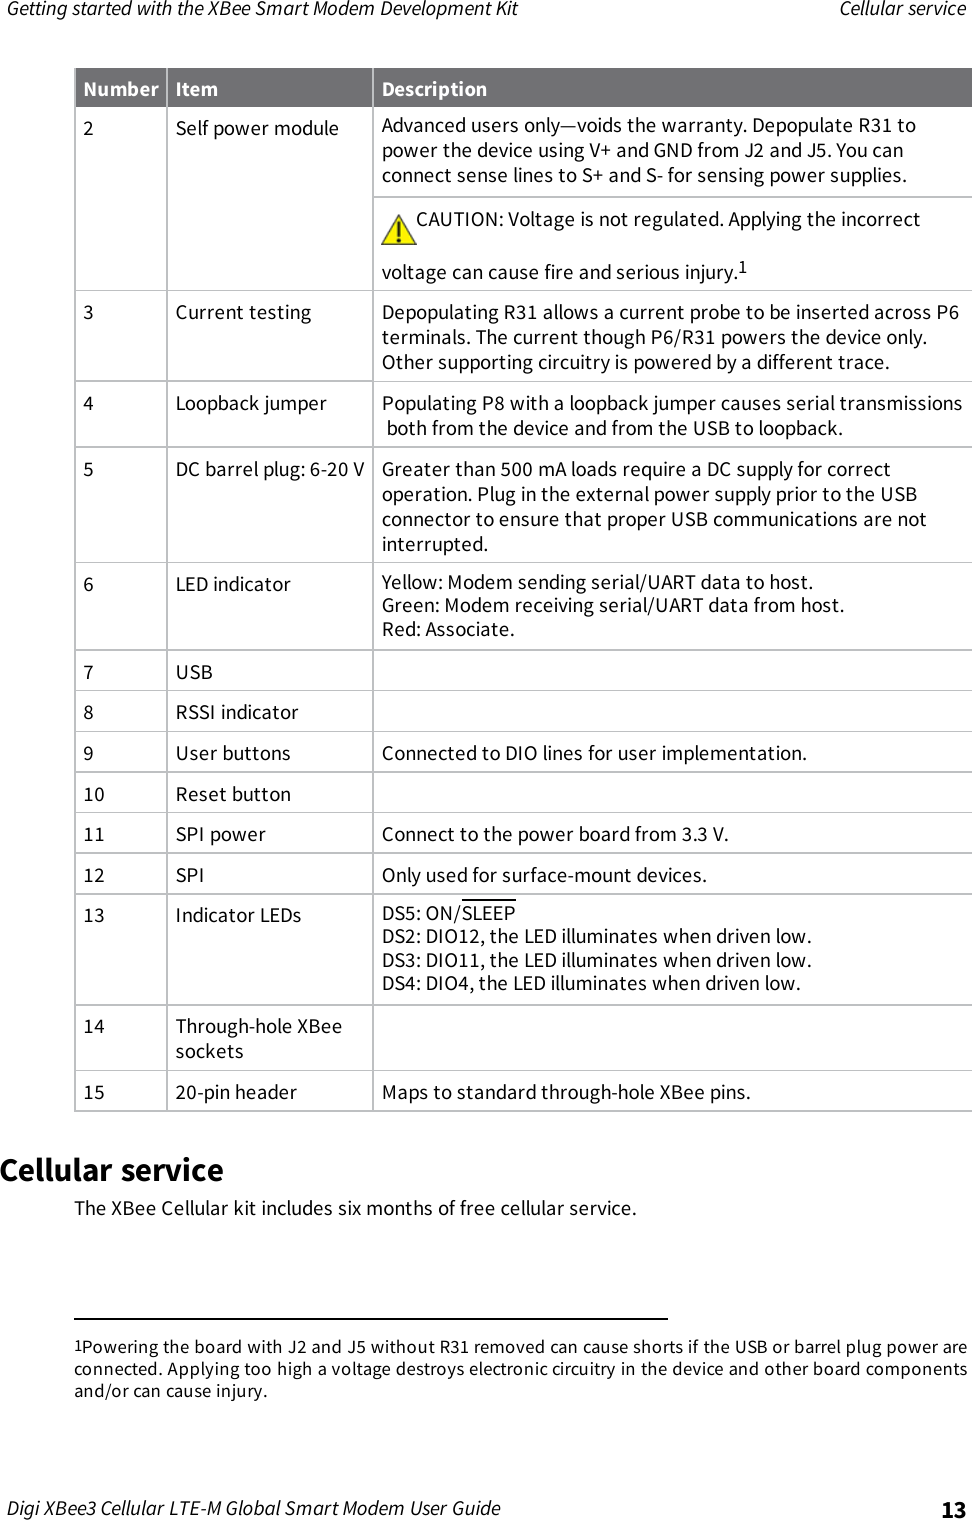 Page 13 of Digi XB3M1 XBee3 Cellular LTE-M User Manual 